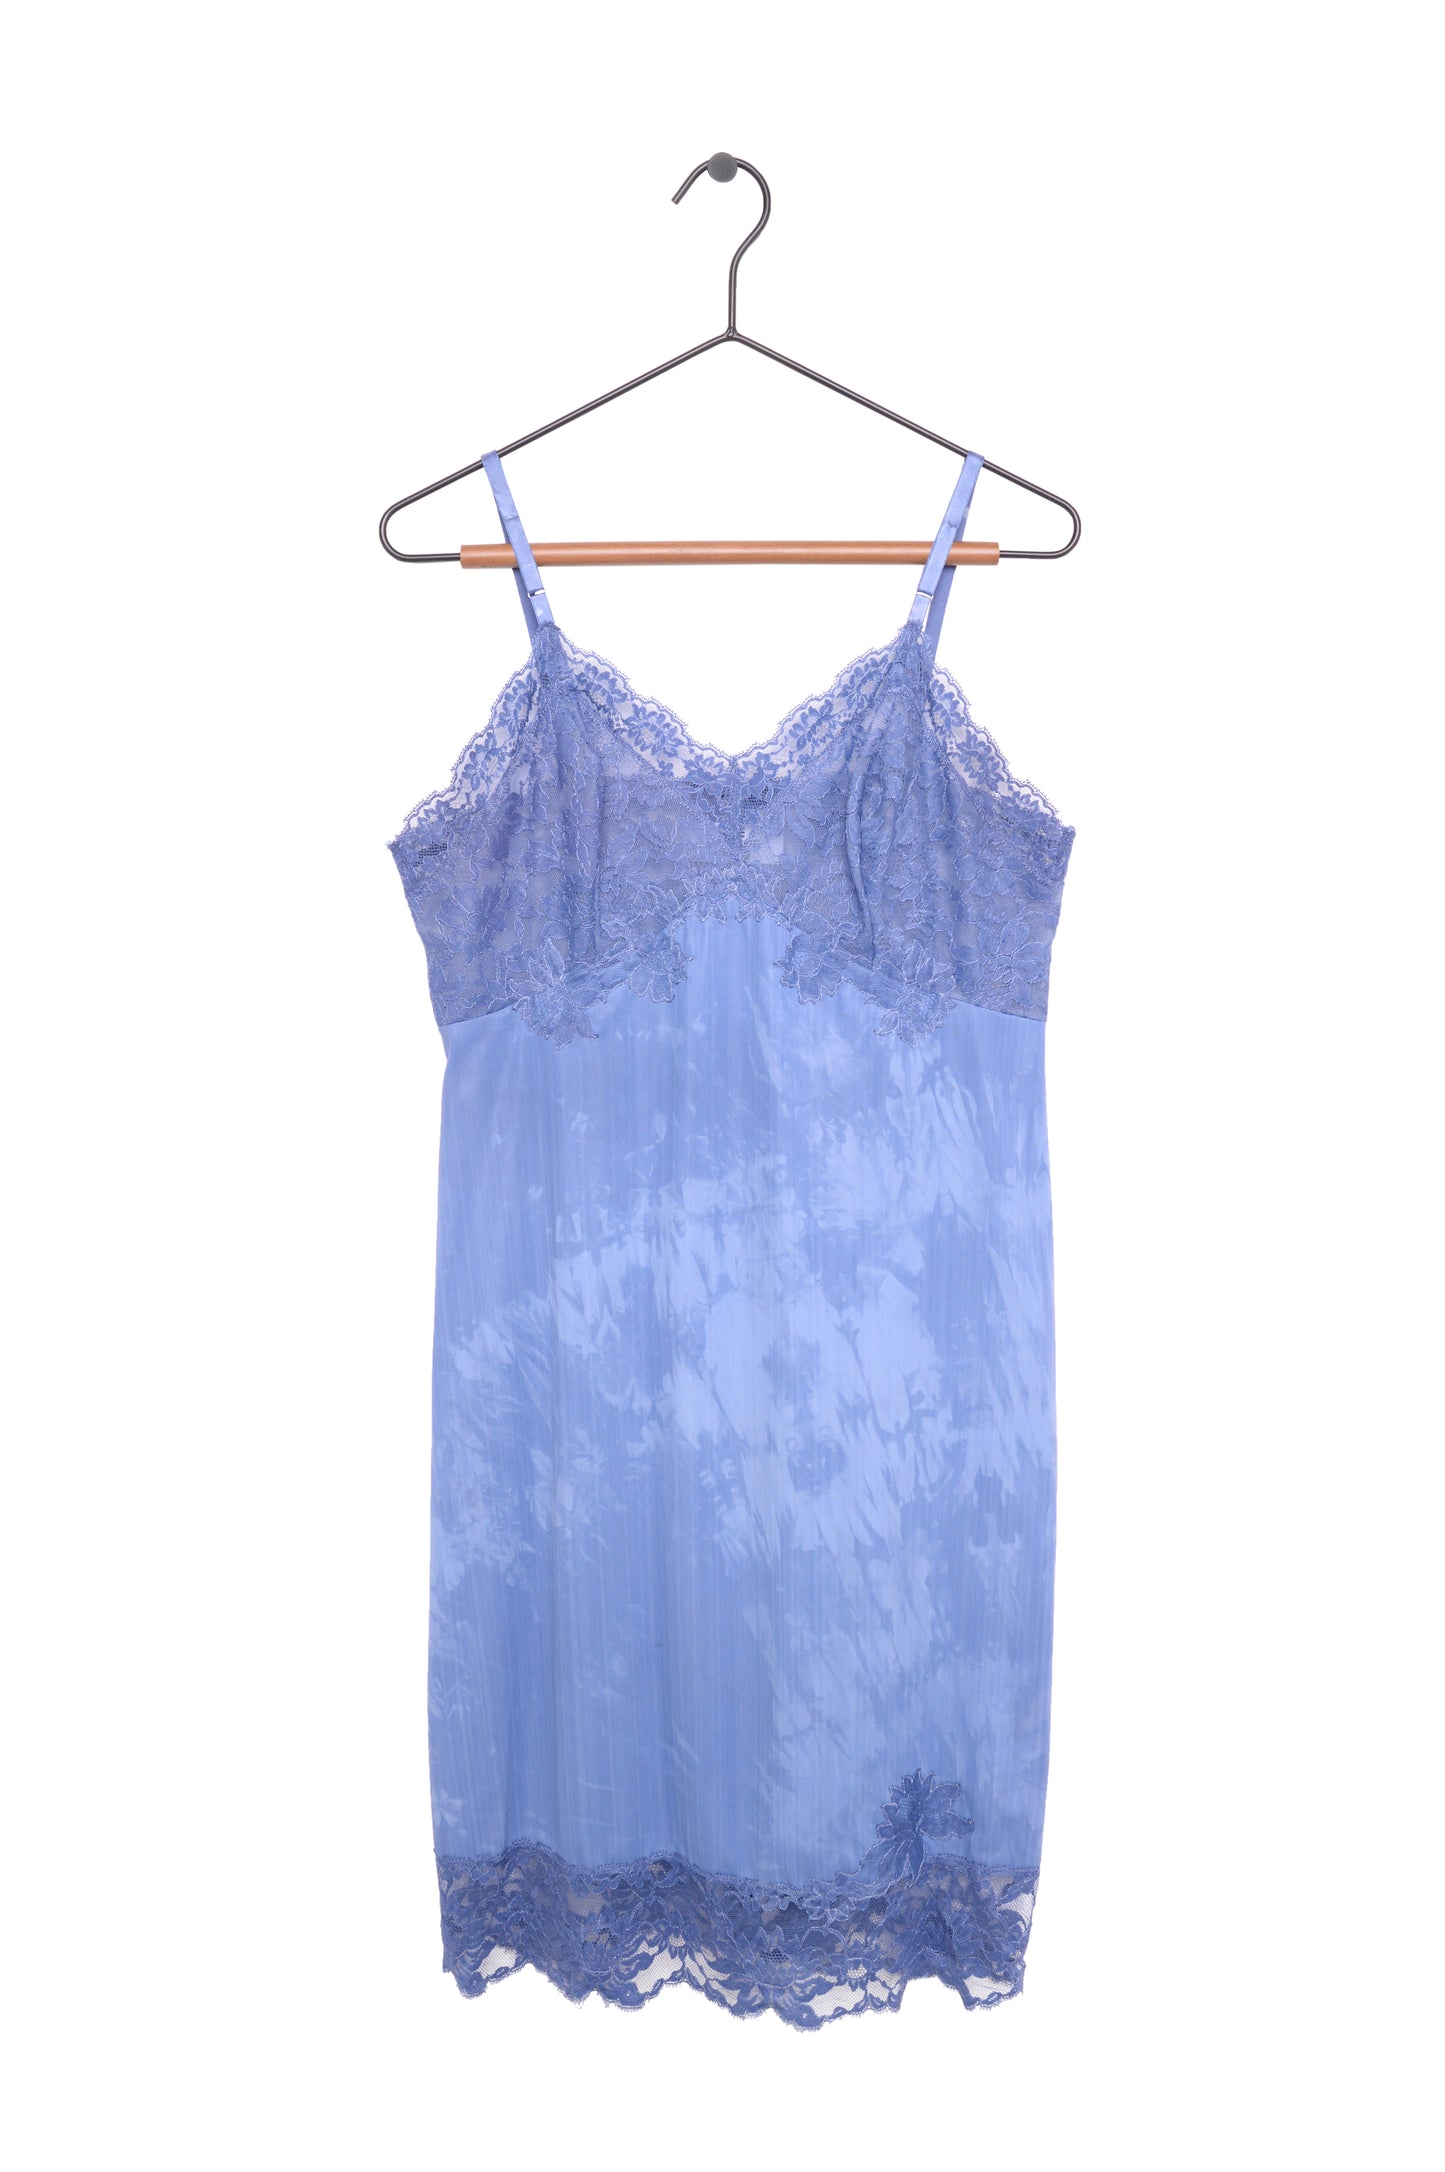 Hand Dyed Lace Slip Dress